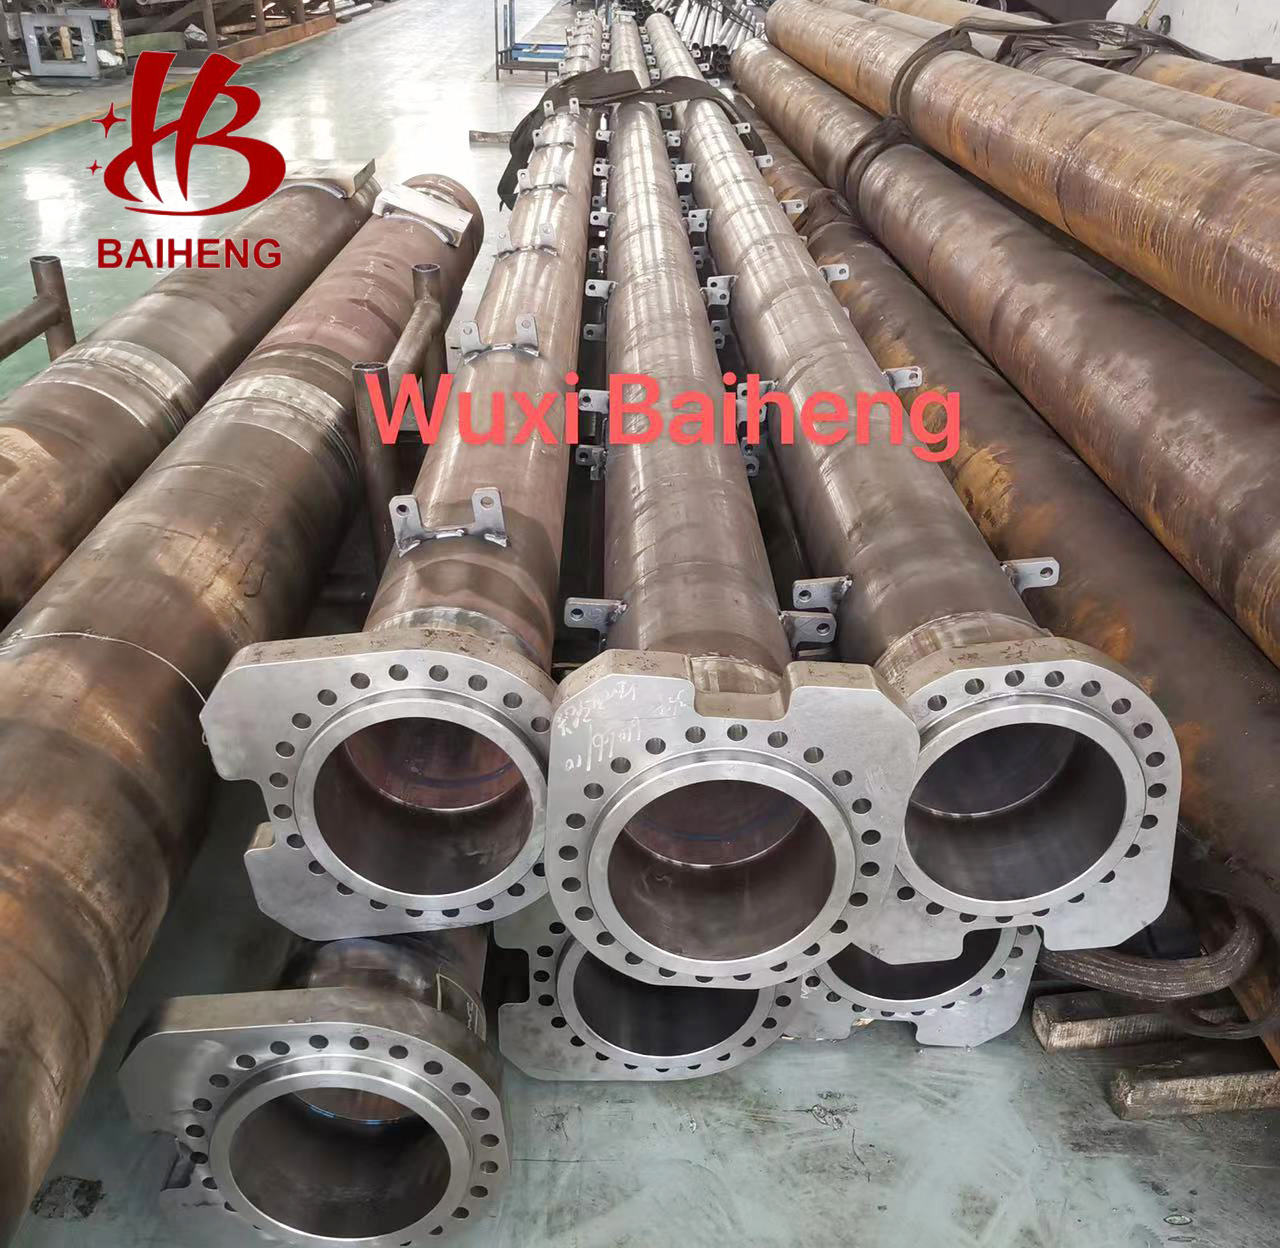 16.5 meter length hydraulic cylinder tubes for Sany group forTelescopic cylinder barrel of 1600 ton crane1